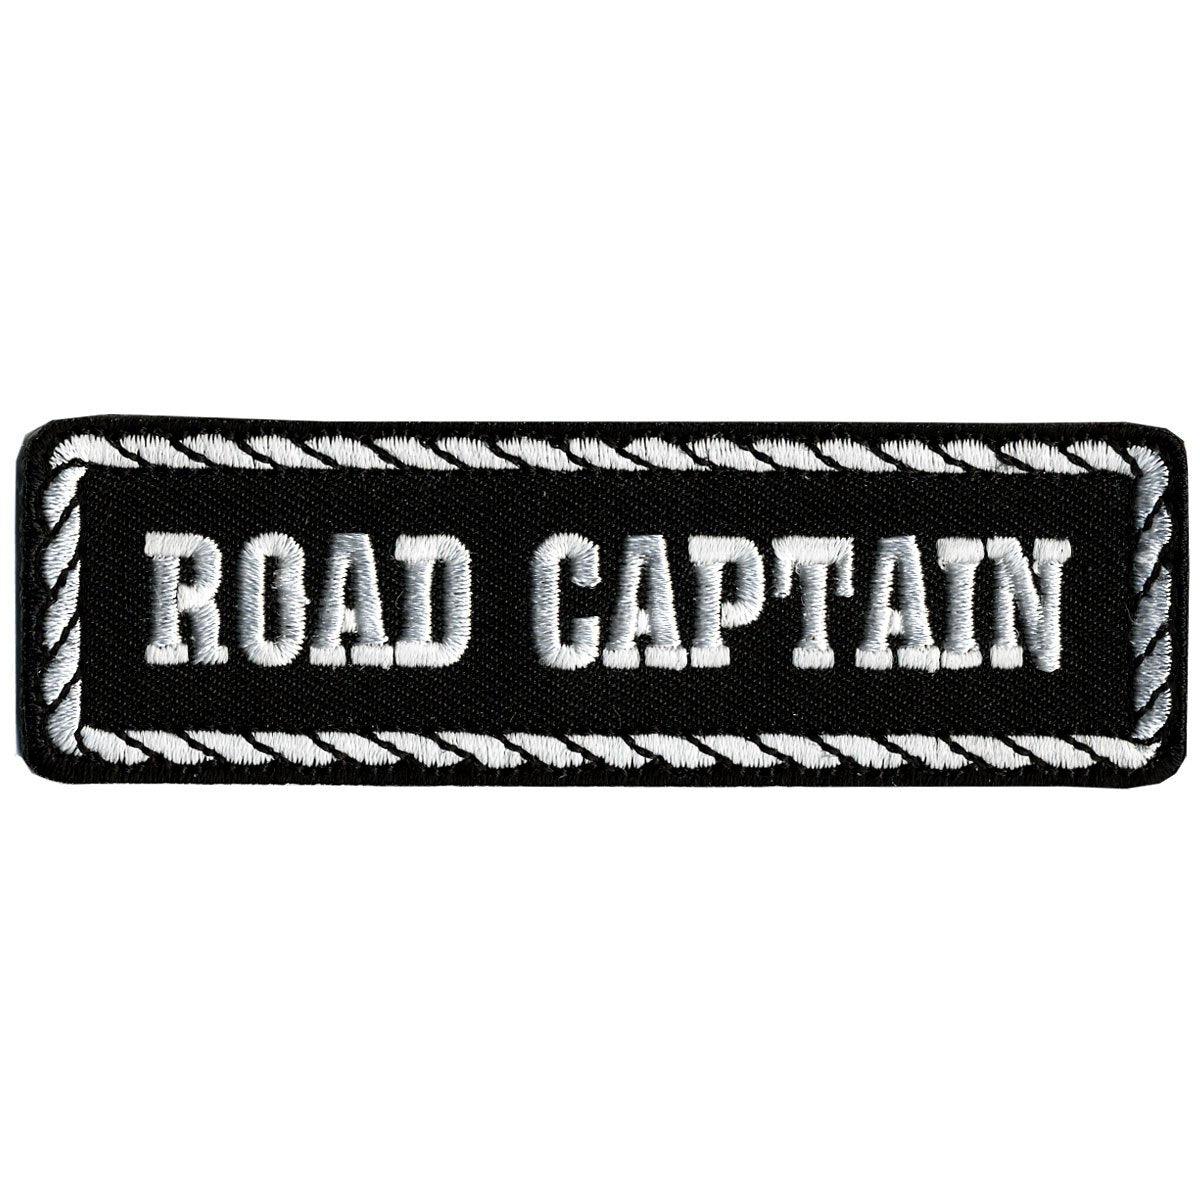 Hot Leathers Road Captain 4" X 1" Patch - American Legend Rider